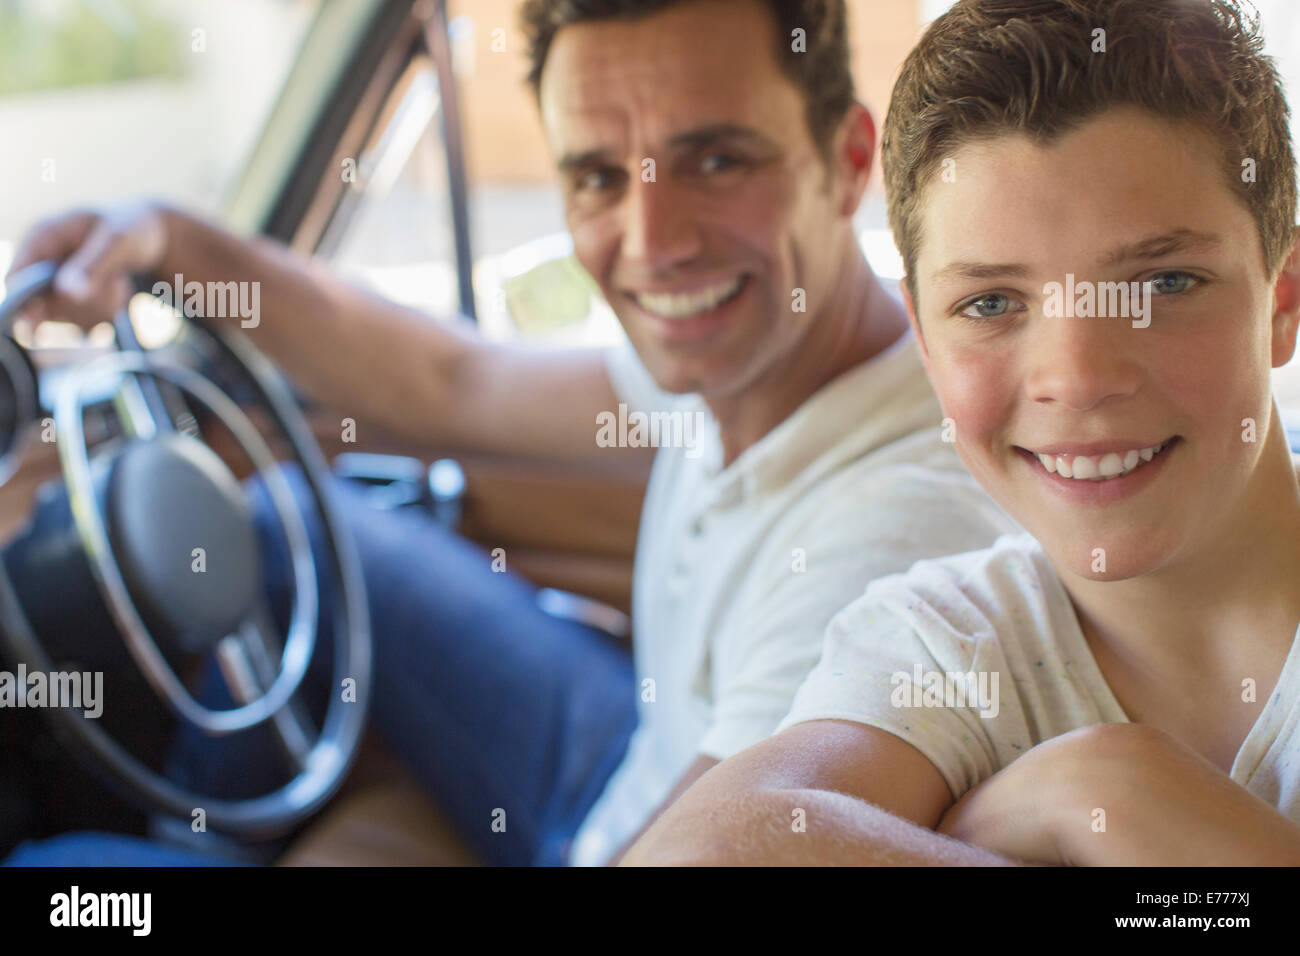 Father and son riding in car together Stock Photo